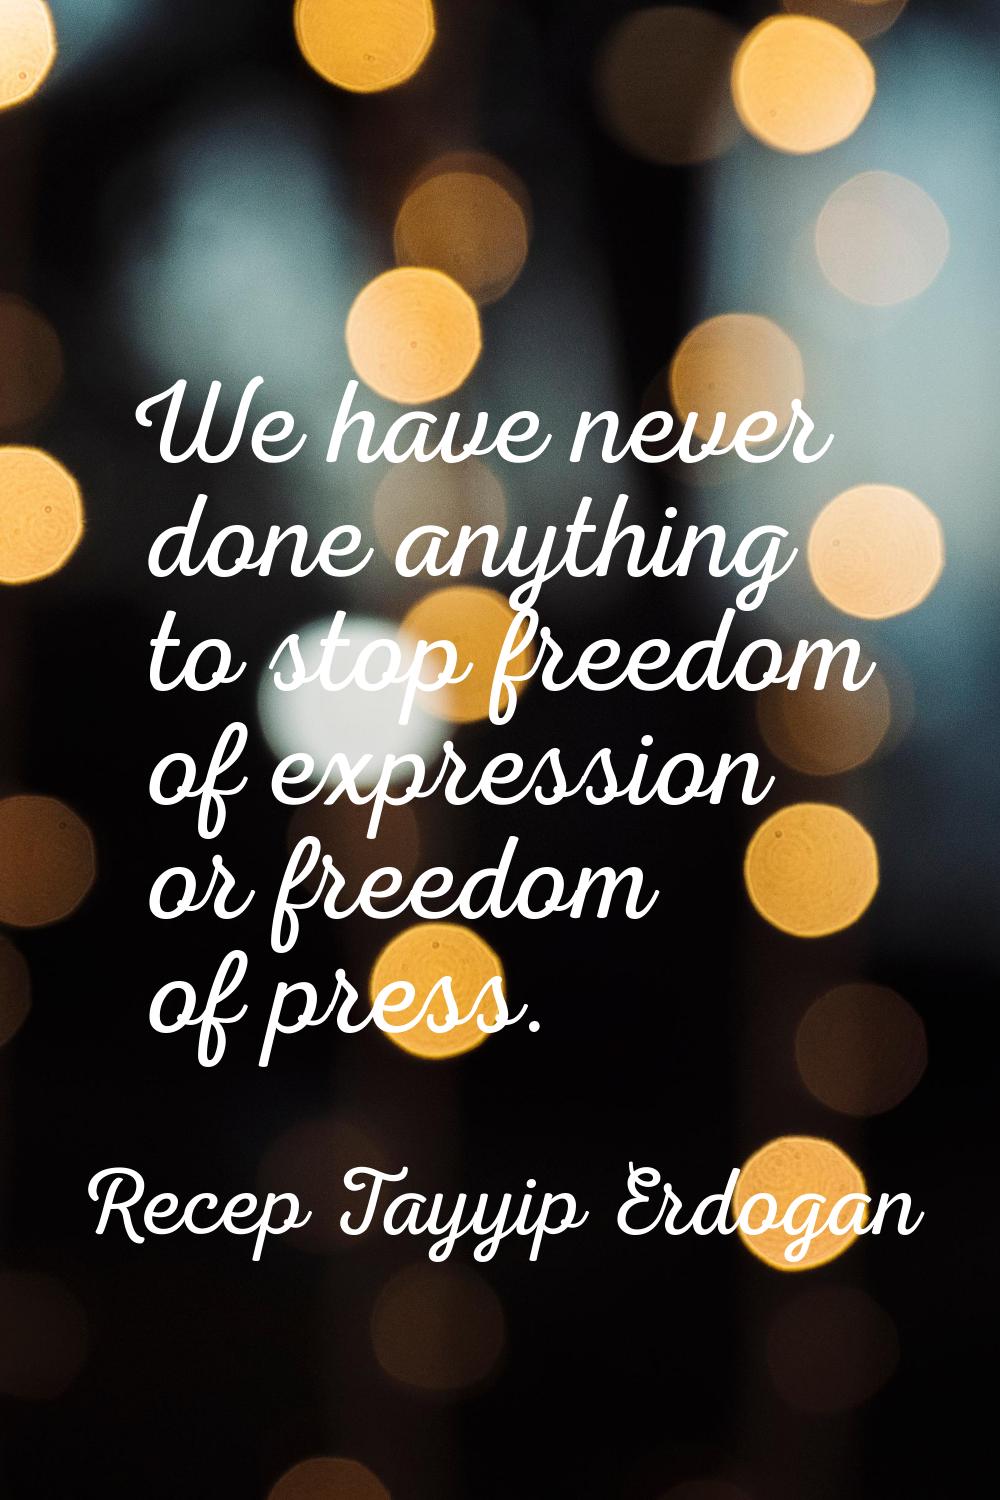 We have never done anything to stop freedom of expression or freedom of press.